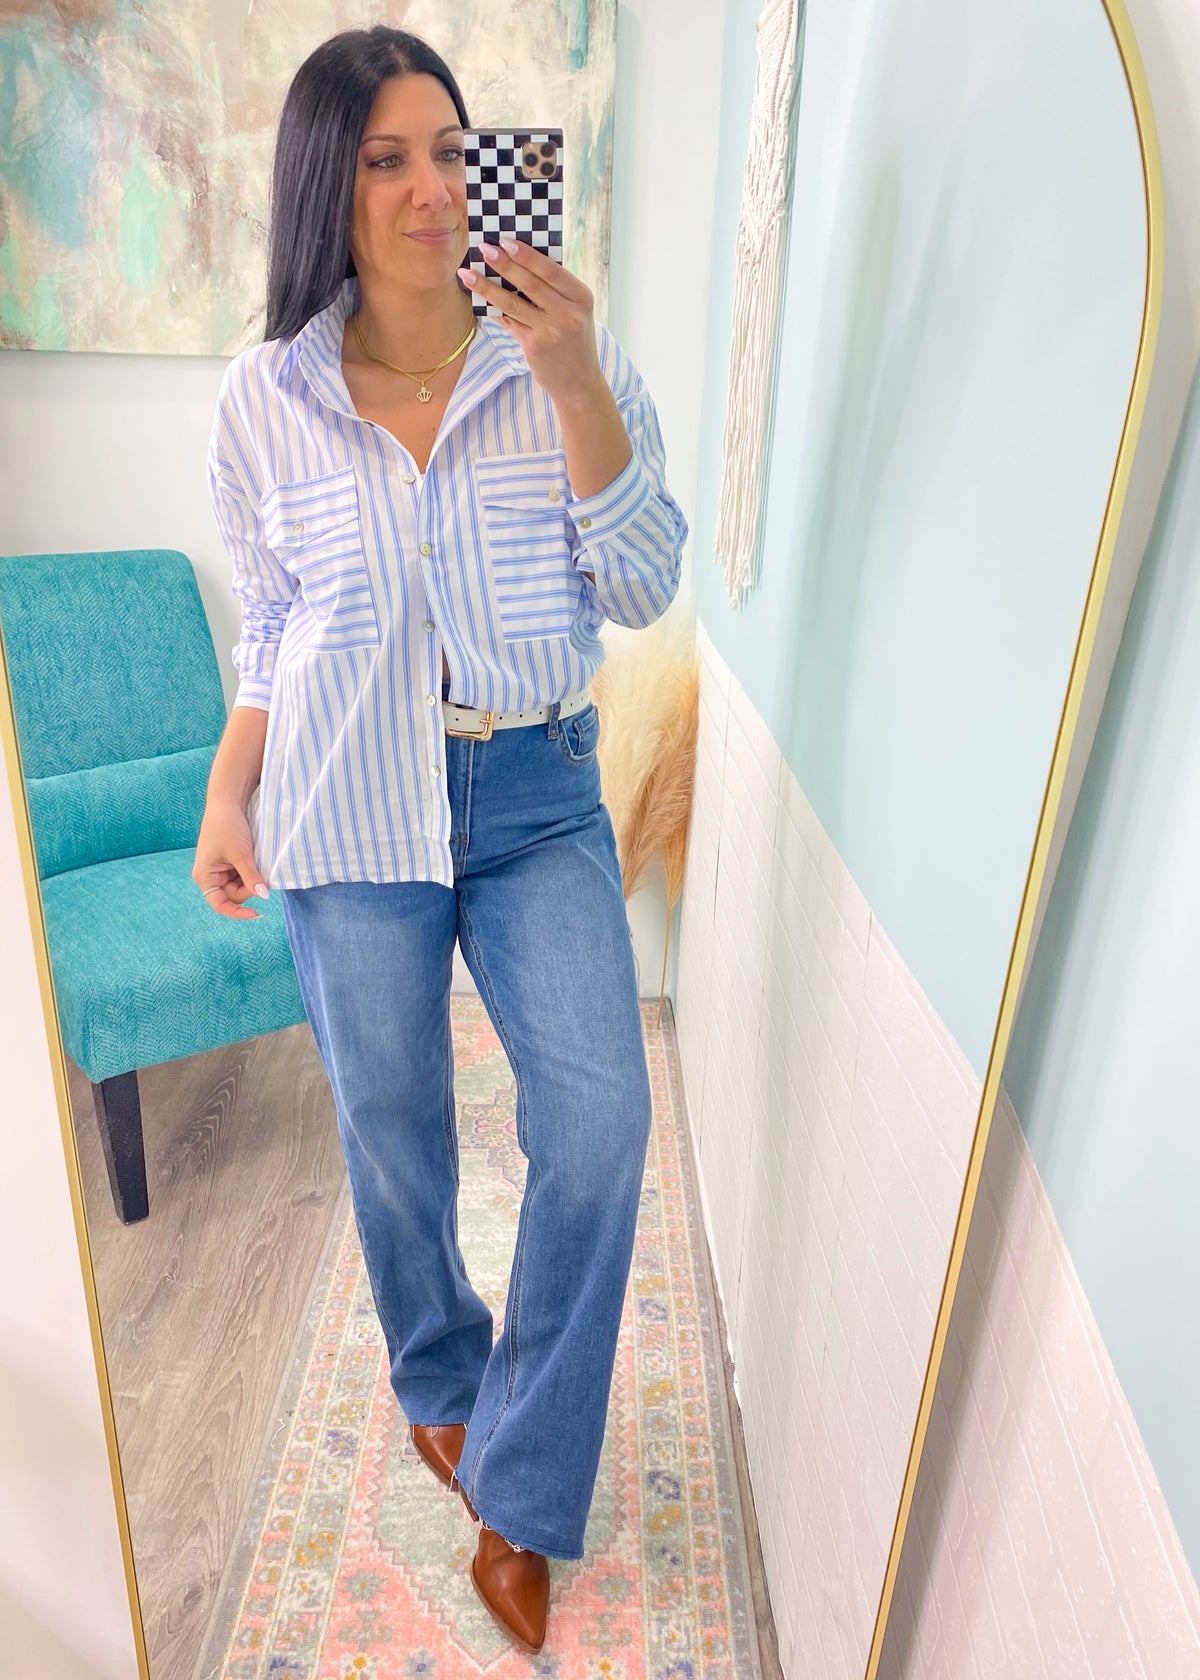 'Ocean Breeze' White & Blue Stripe Button Up Shirt-Lets hear it for the classics! This white &amp; blue striped button down shirt can be worn so many ways and will never go out of style! Give it a nautical vibe with white bottoms or make it a night out unbuttoned and front tied with a pair of jeans. Also work friendly!-Cali Moon Boutique, Plainville Connecticut